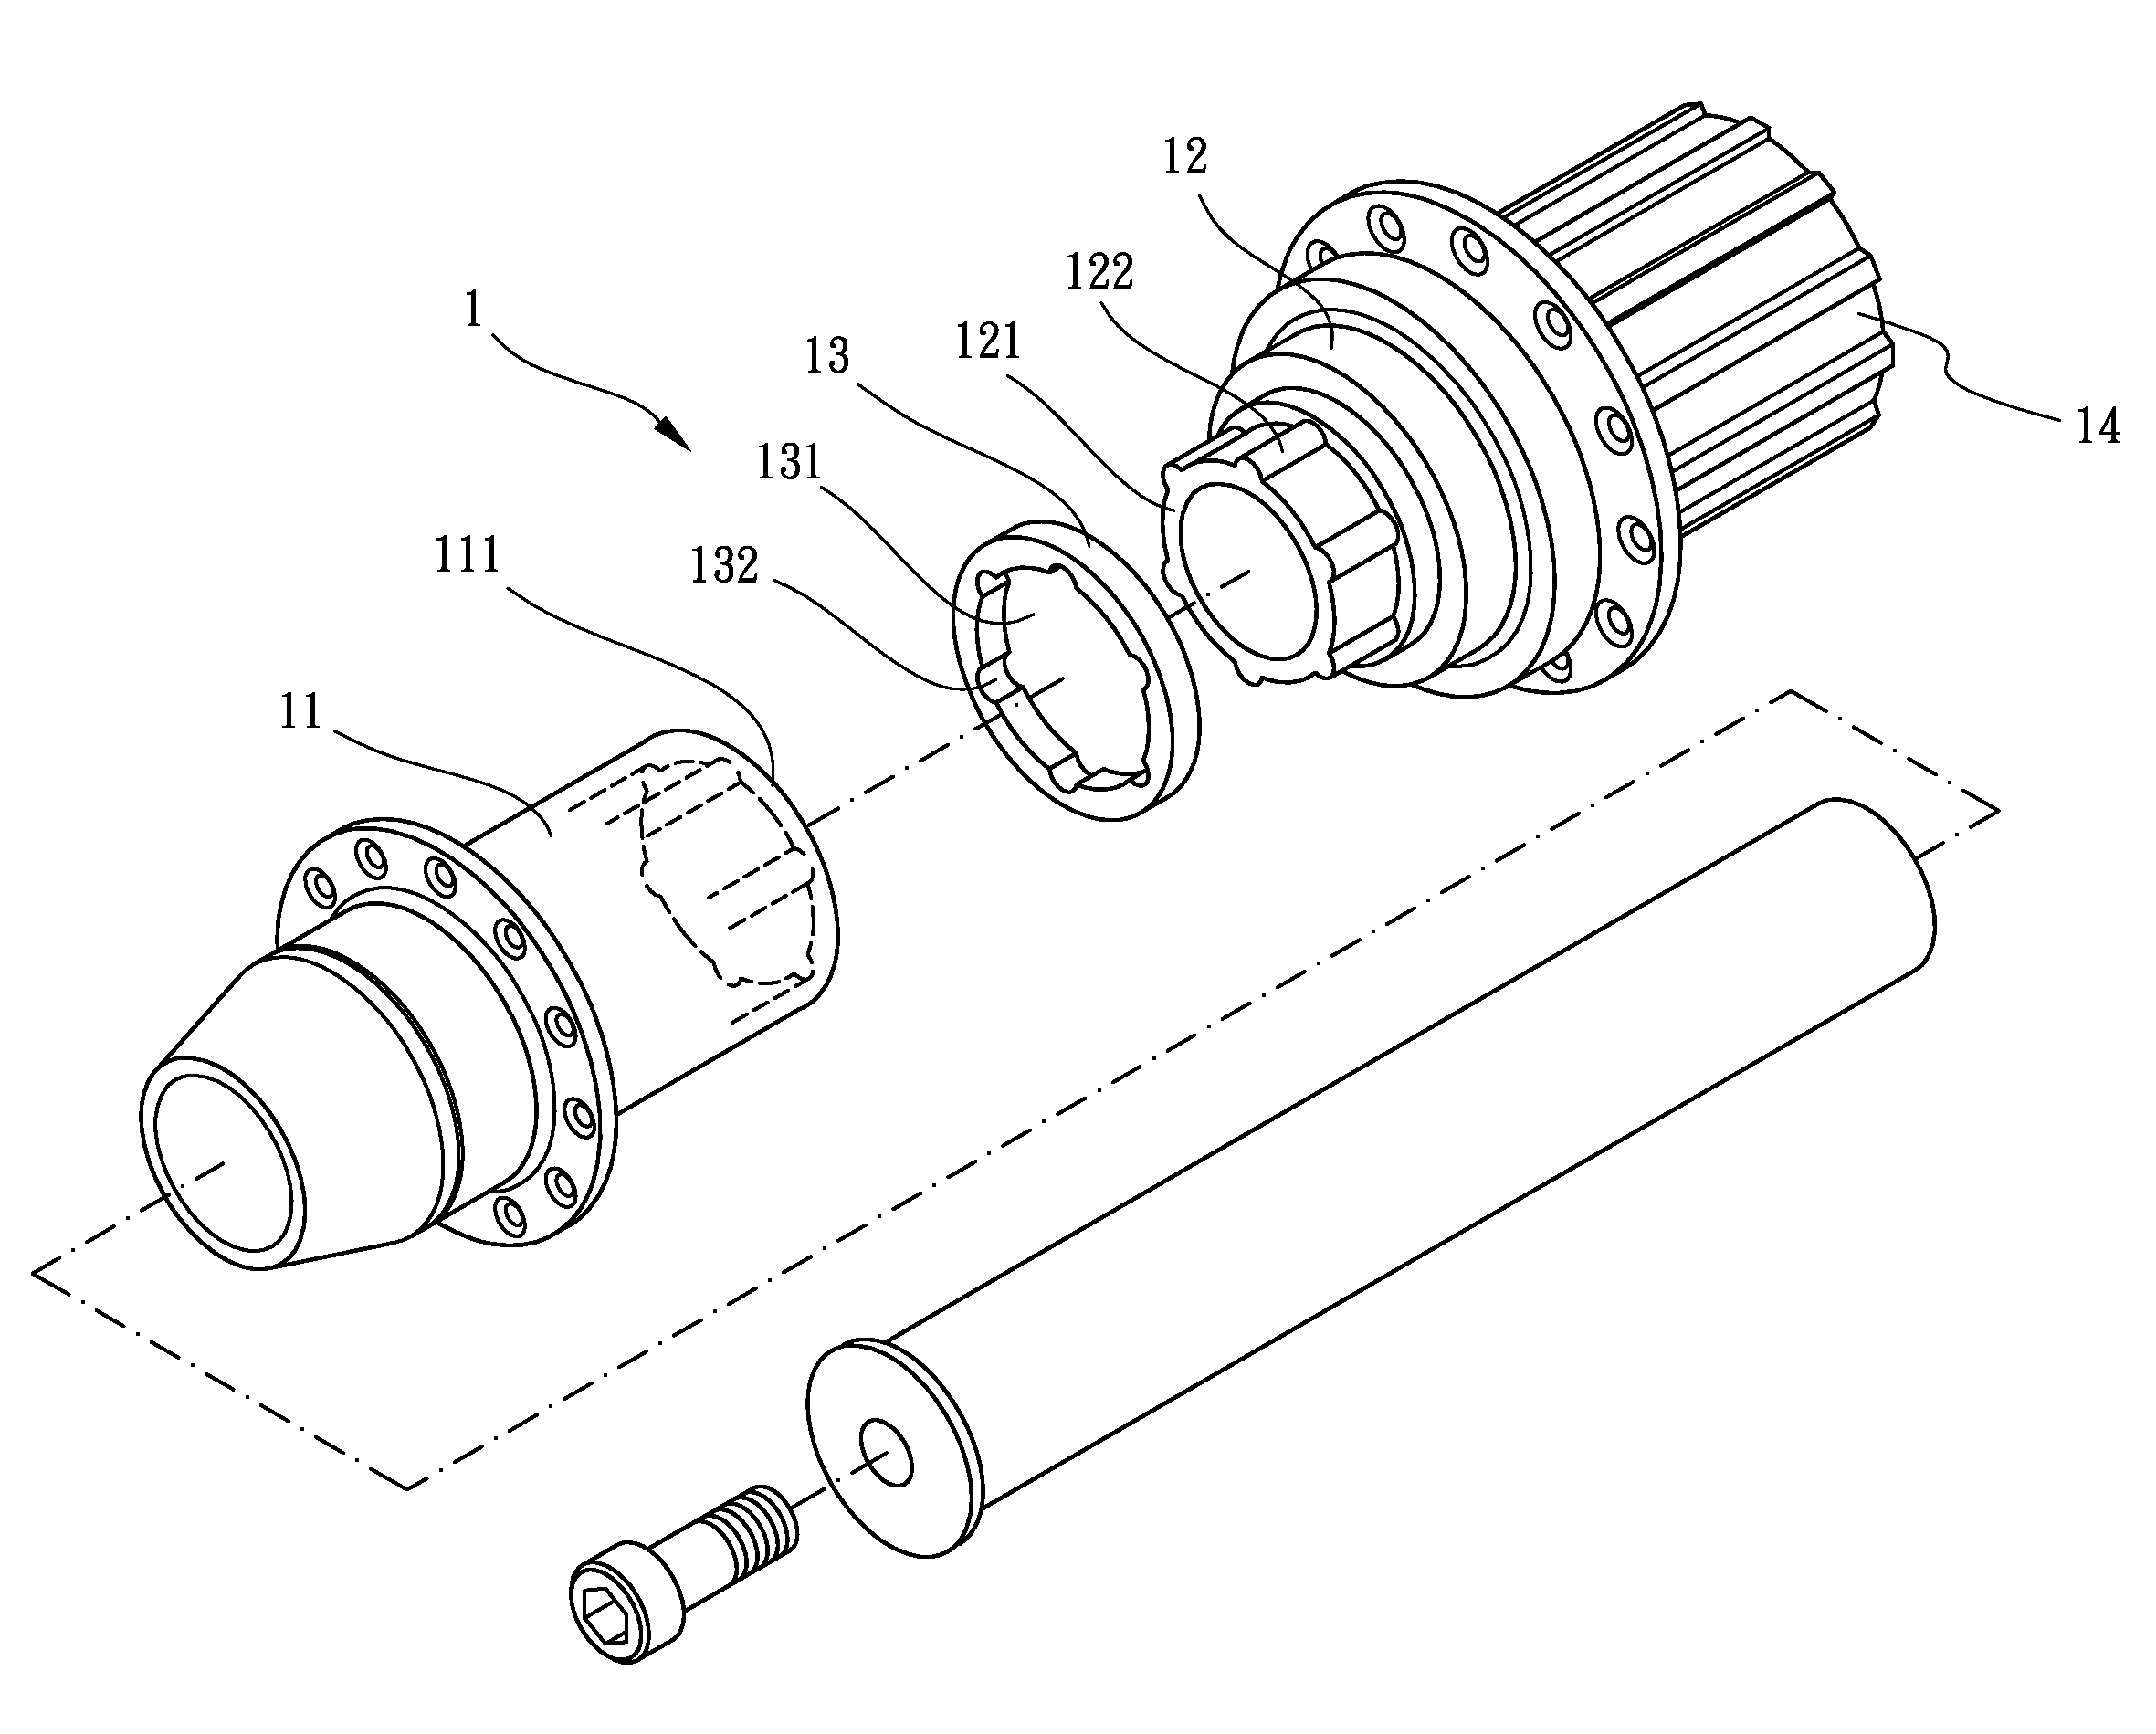 Wheel hub structure of a bicycle